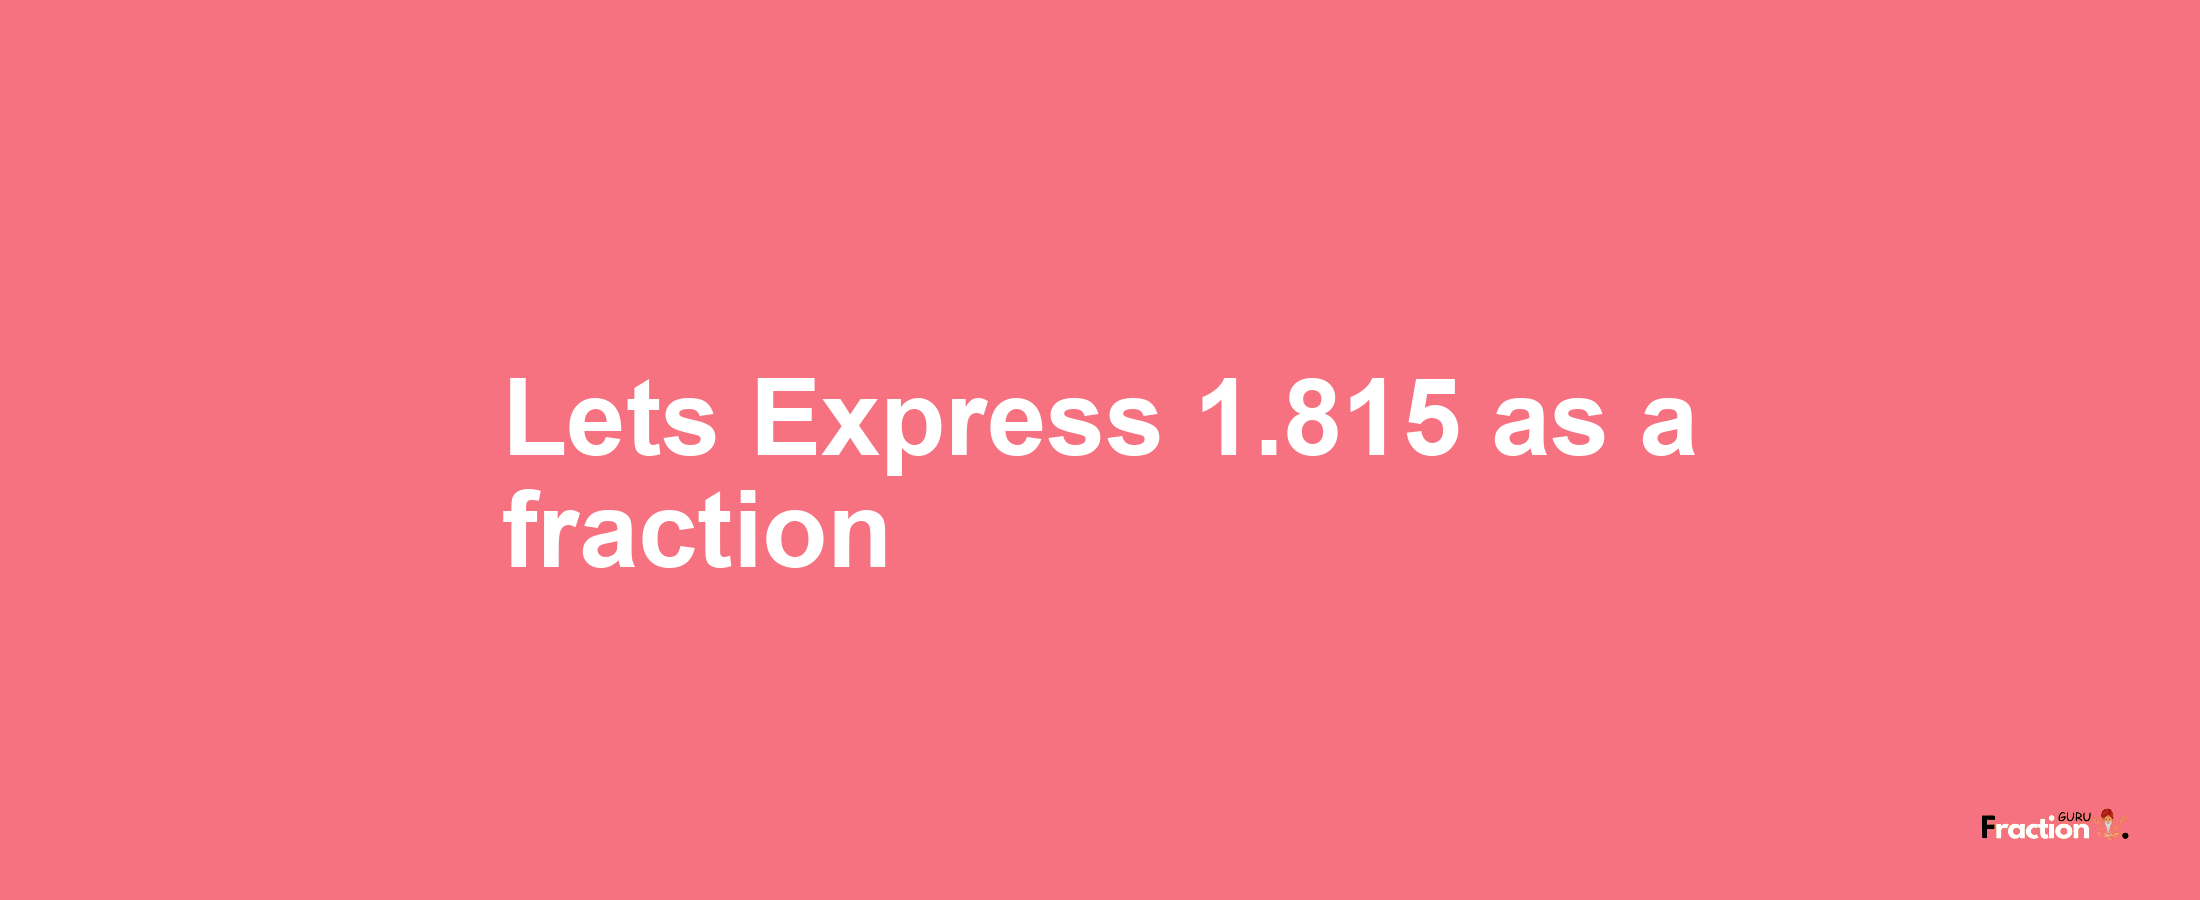 Lets Express 1.815 as afraction